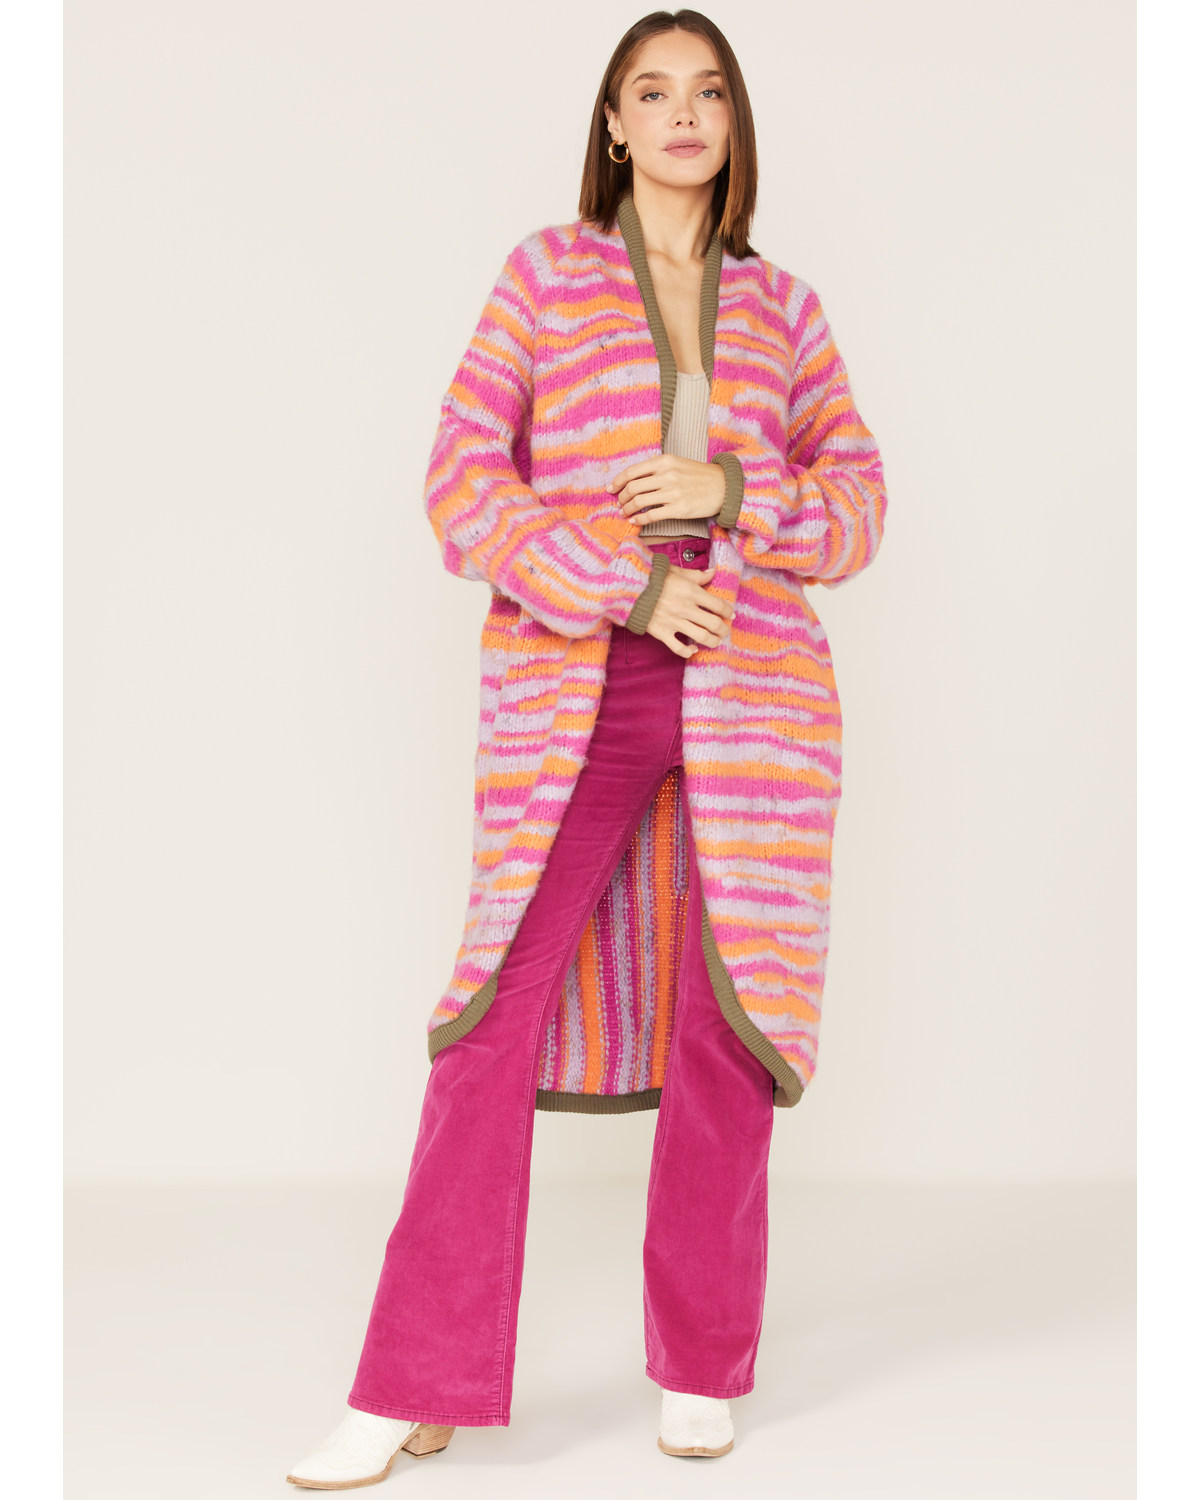 Free People Women's Pink Tiger Knit Duster